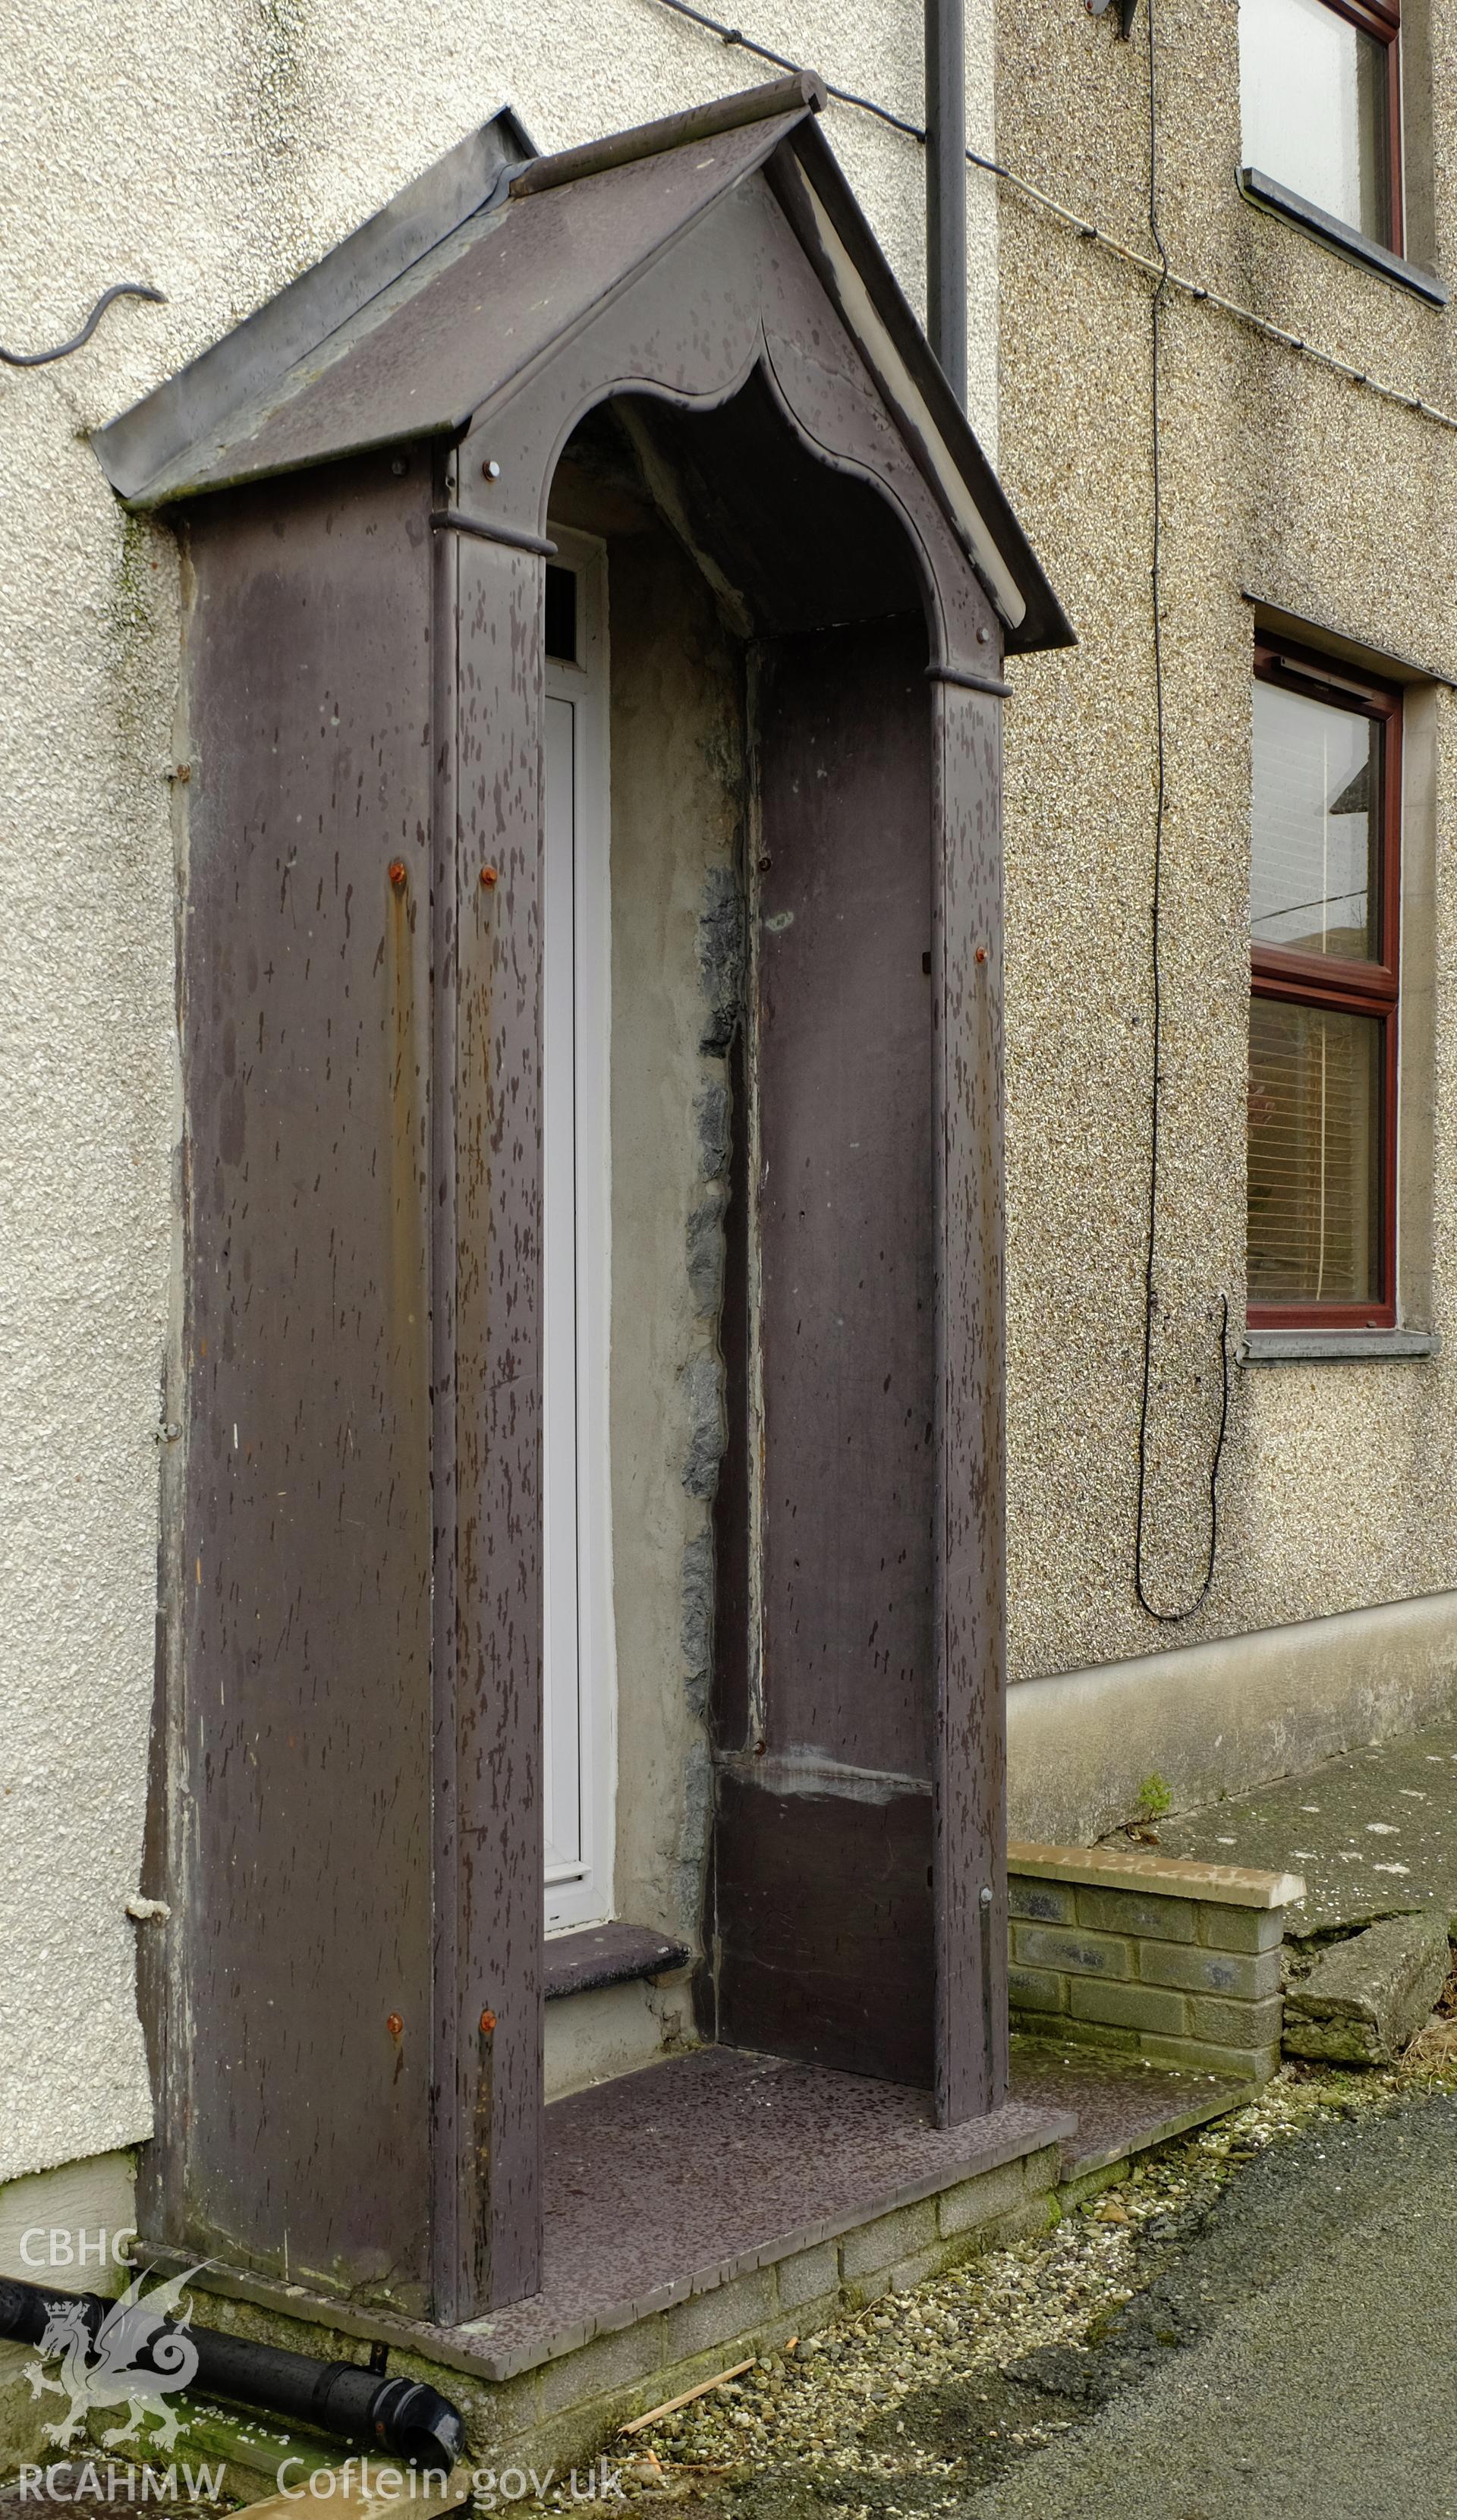 Colour photograph showing view of a slate porch on Hill Street, Gerlan, Bethesda, produced by Richard Hayman 16th February 2017